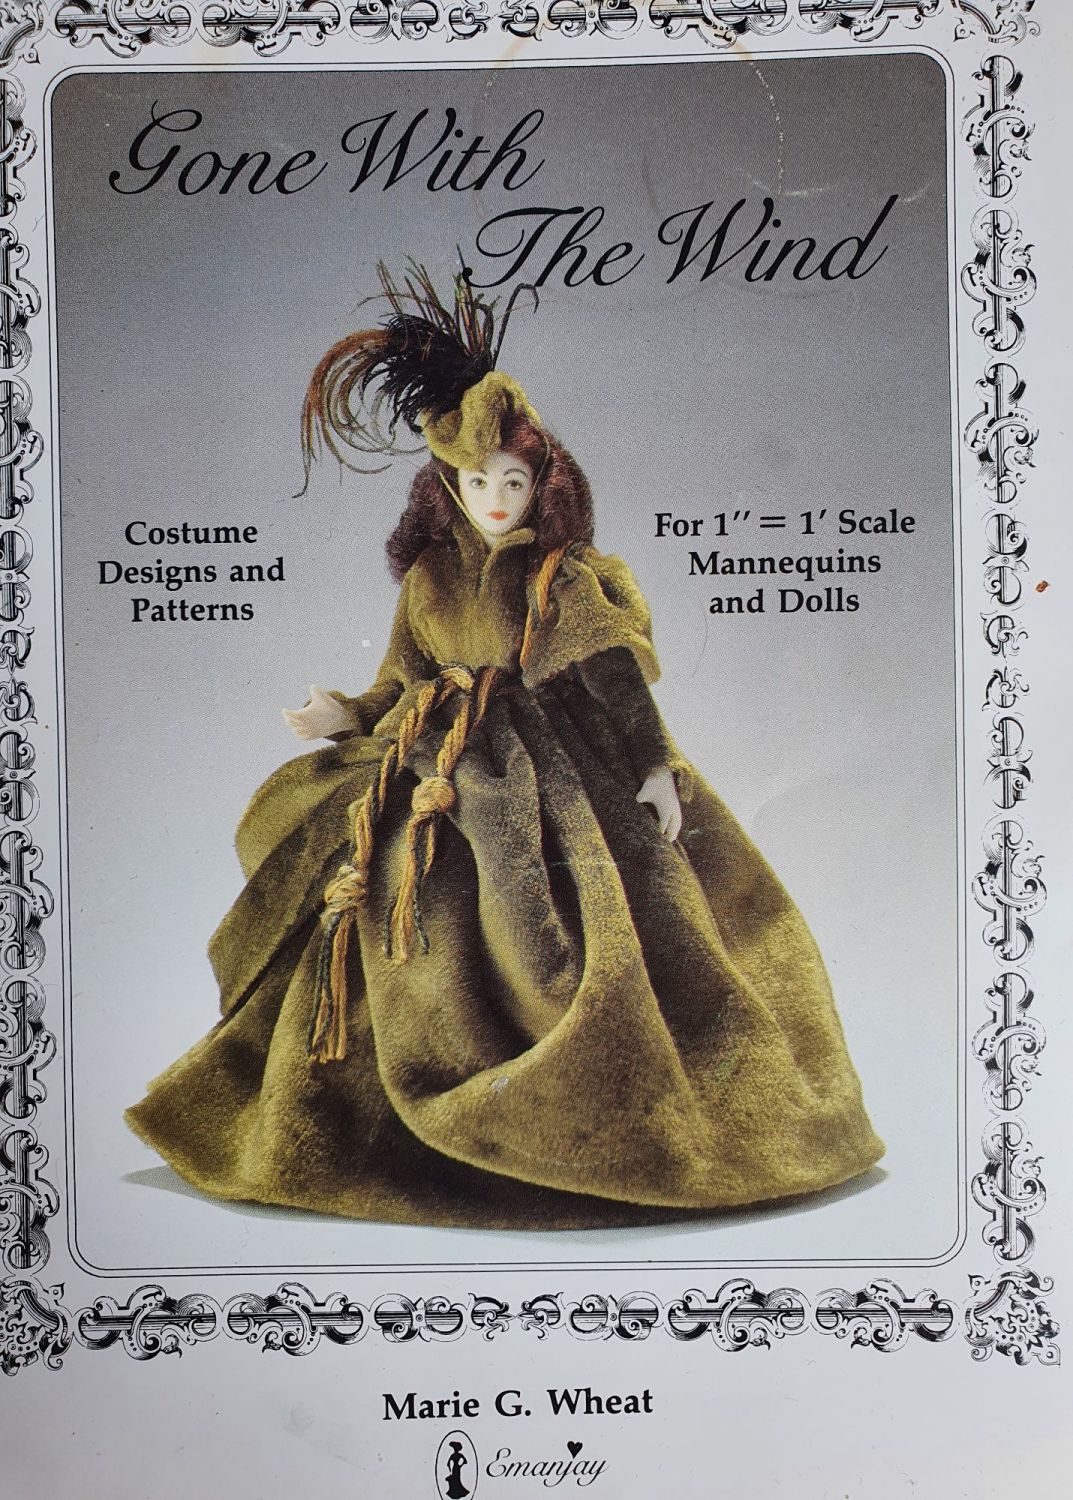 Gone with the Wind Pattern book